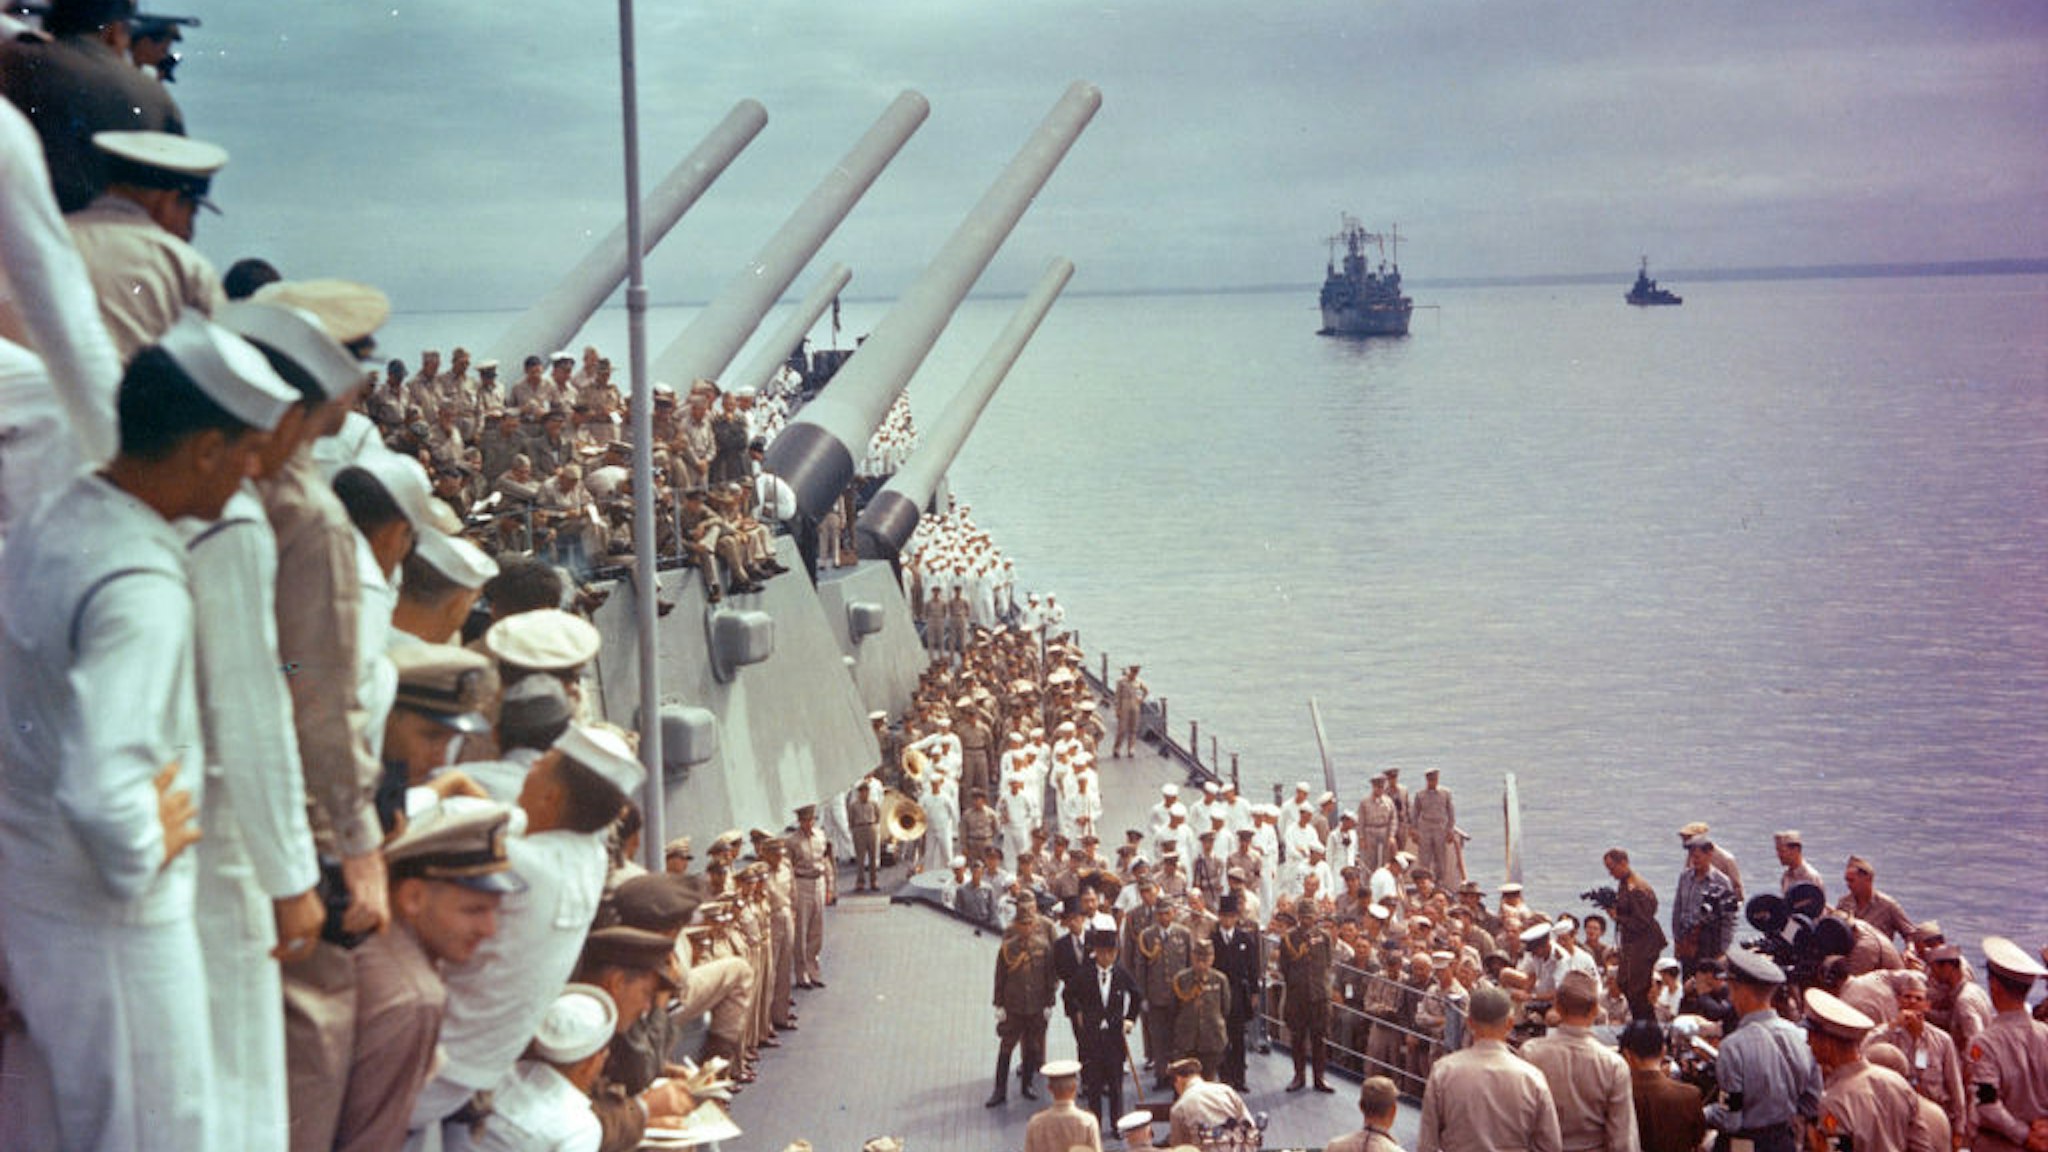 General view of US sailors as they watch the signing of the Japanese Instrument of Surrender (which ended World War II) on the deck of the USS Missouri, anchored in Tokyo Bay, Japan, September 2, 1945. Dutch Lieutenant-Admiral Conrad Helfrich (1886 - 1962) (seated at table, center bottom) is signing as, among those also pictured, US General Douglas MacArthur (1880 - 1964) (standing to Helfrich's right) and the members of the Japanese delegation watch. They are, front row from left Japanese Minister of Foreign Affairs Mamoru Shigemitsu (1887 - 1957) (with cane) and Chief of the General Staff General Yoshijiro Umezu (1882 - 1949); second row, Major General Yatsuji Nagai (1901 - 1970), Foreign Minister Katsuo Okazaki (1897 - 1965), Rear Admiral Tadatoshi Tomioka (1897 - 1970), Foreign Minister Toshikazu Kase (1903 - 2004), and Lieutenant General Suichi Miyakazi (1895 - 1969); third row, Rear Admiral Ichiro Yokoyama (1900 - 1993), Foreign Minister Saburo Ohta, Captain Katsuo Shiba (1901 - 1970), and Colonel Kaziyi Sugita (1904 - 1993).